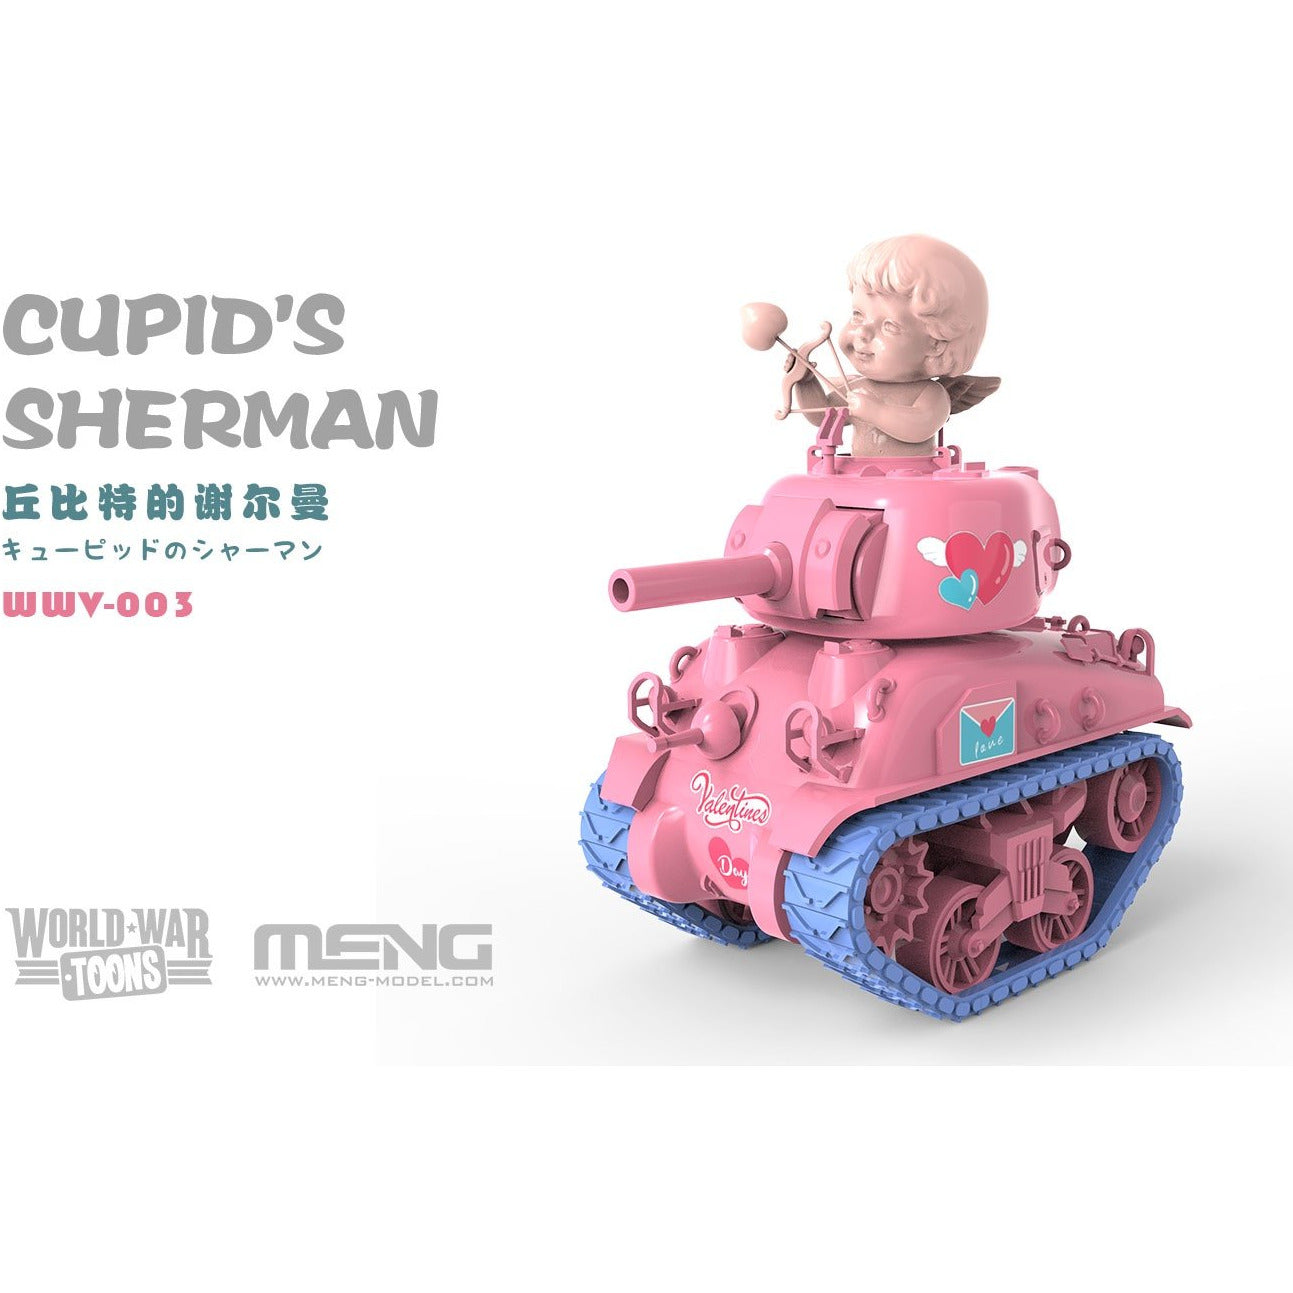 M4A1 Cupid's Sherman by Meng